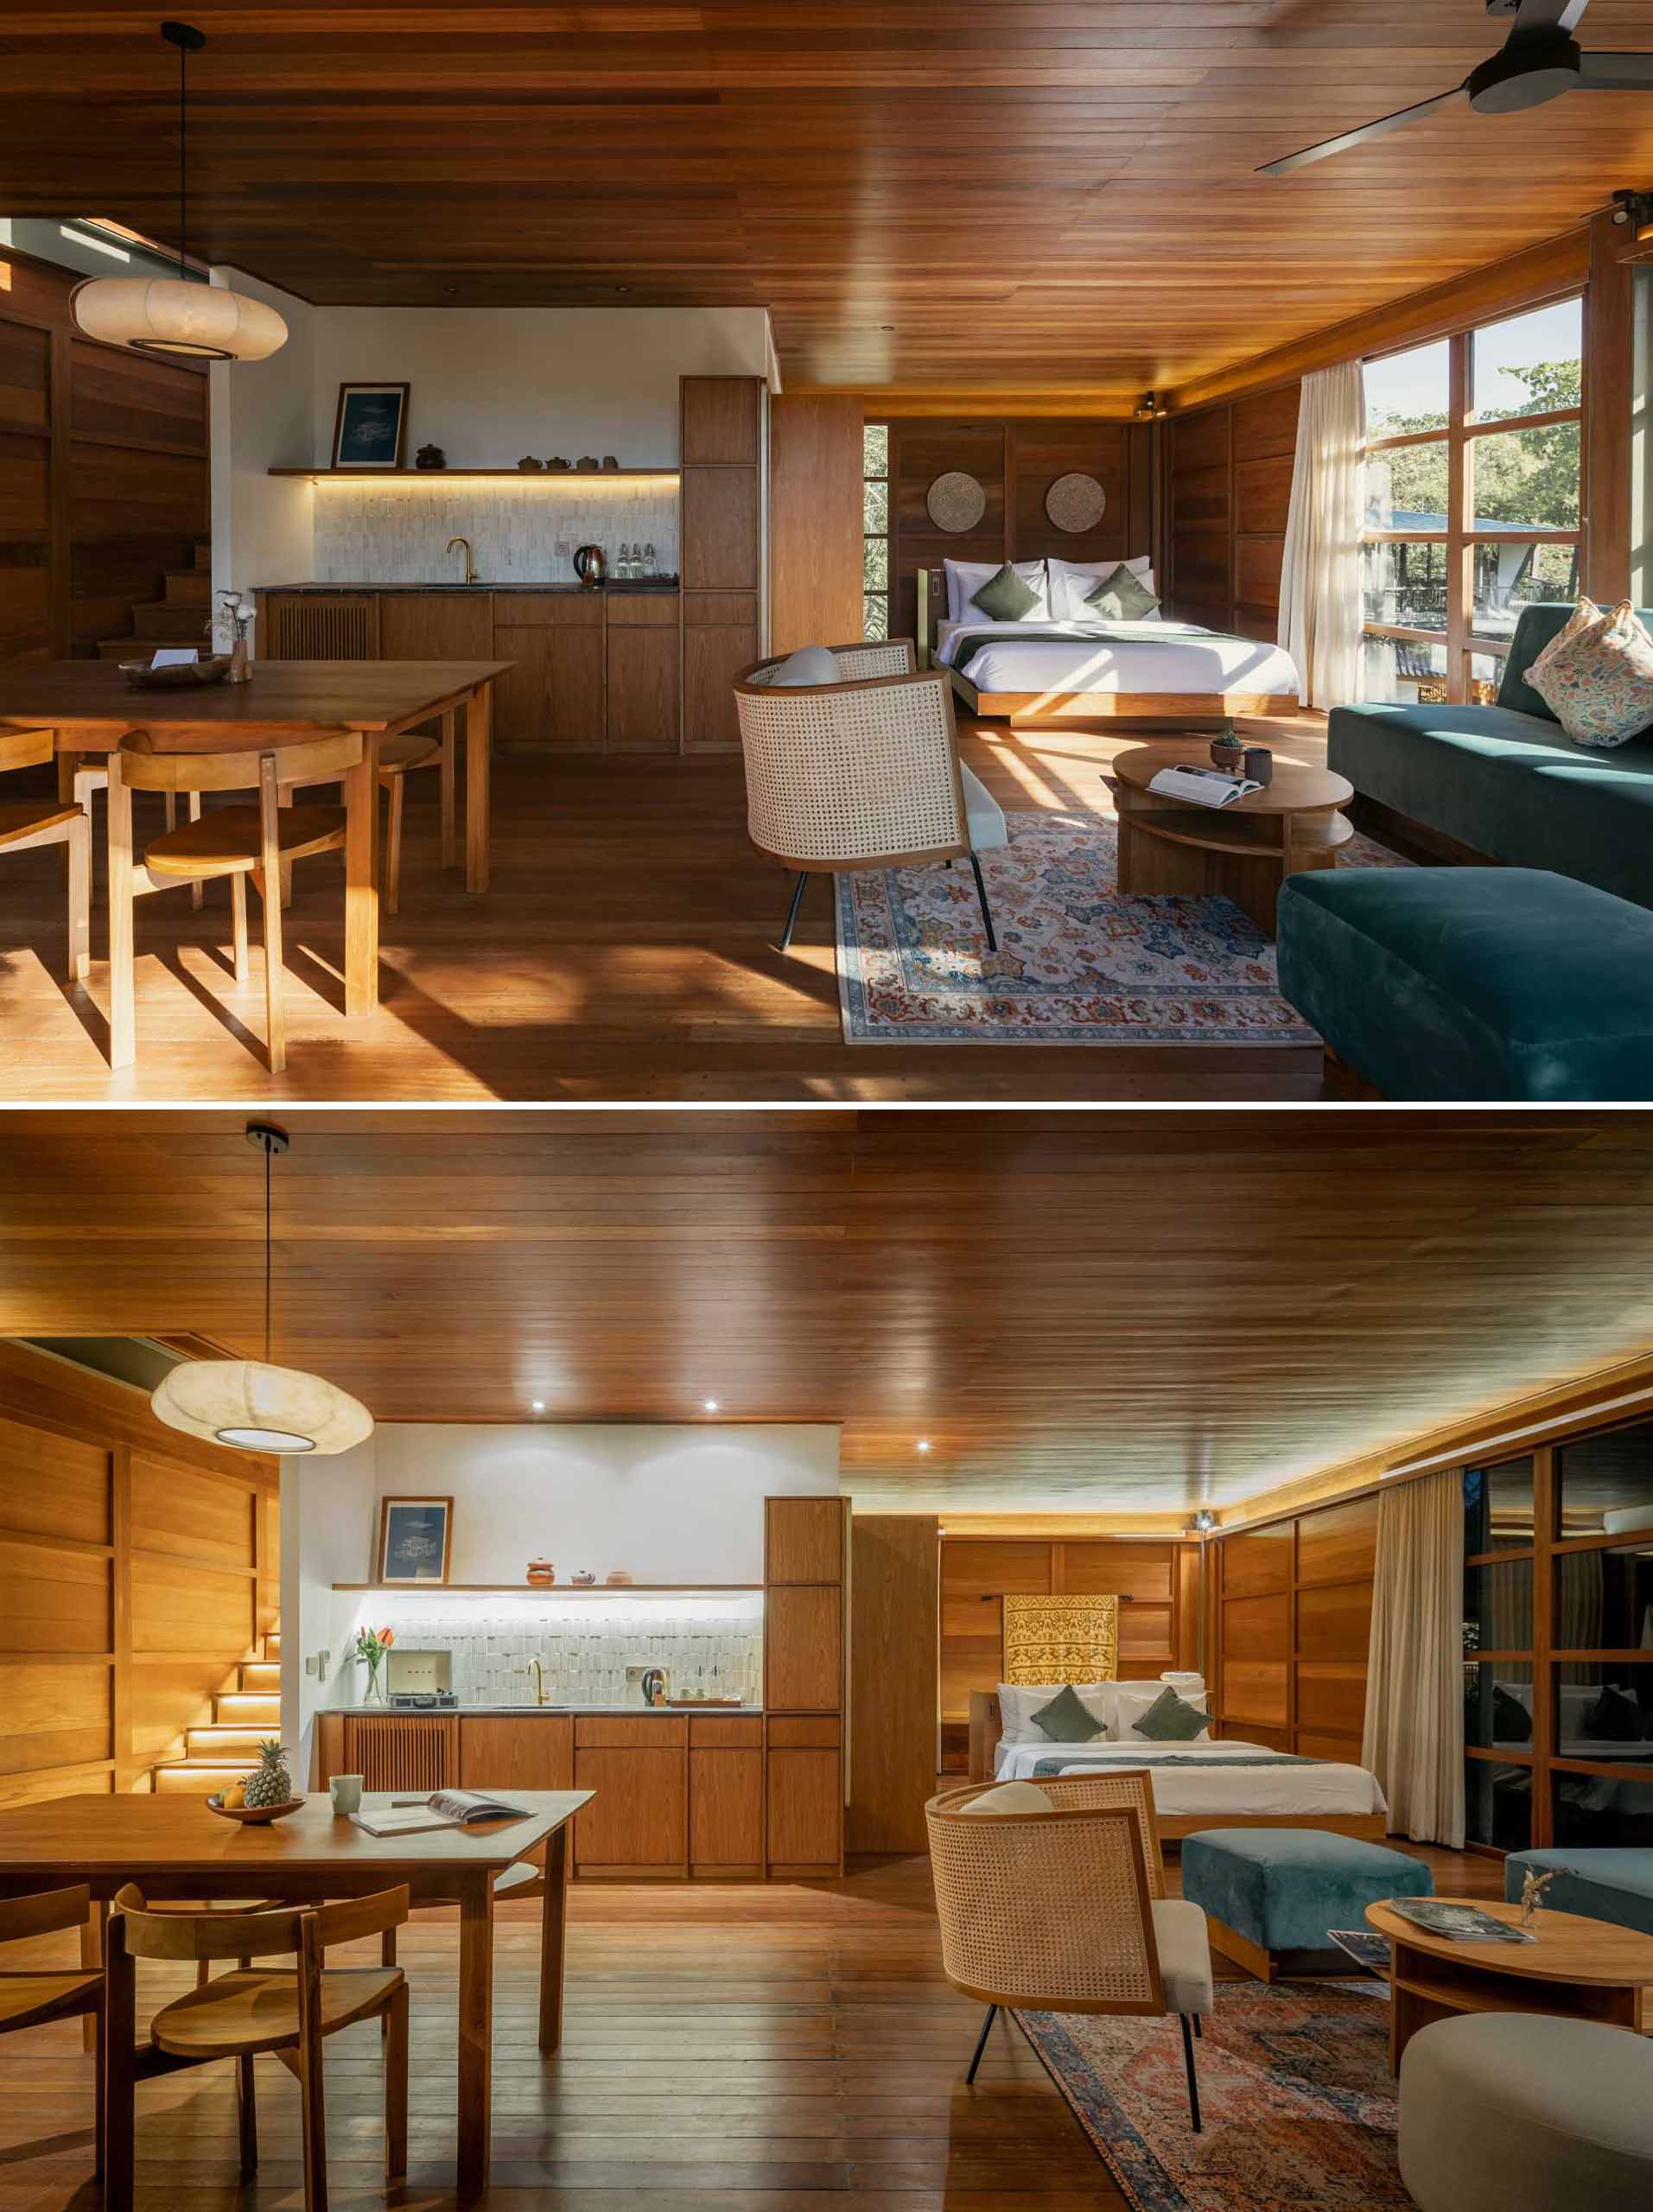 A modern cabin with hidden lighting that lights up the cabin with a soft glow at night.